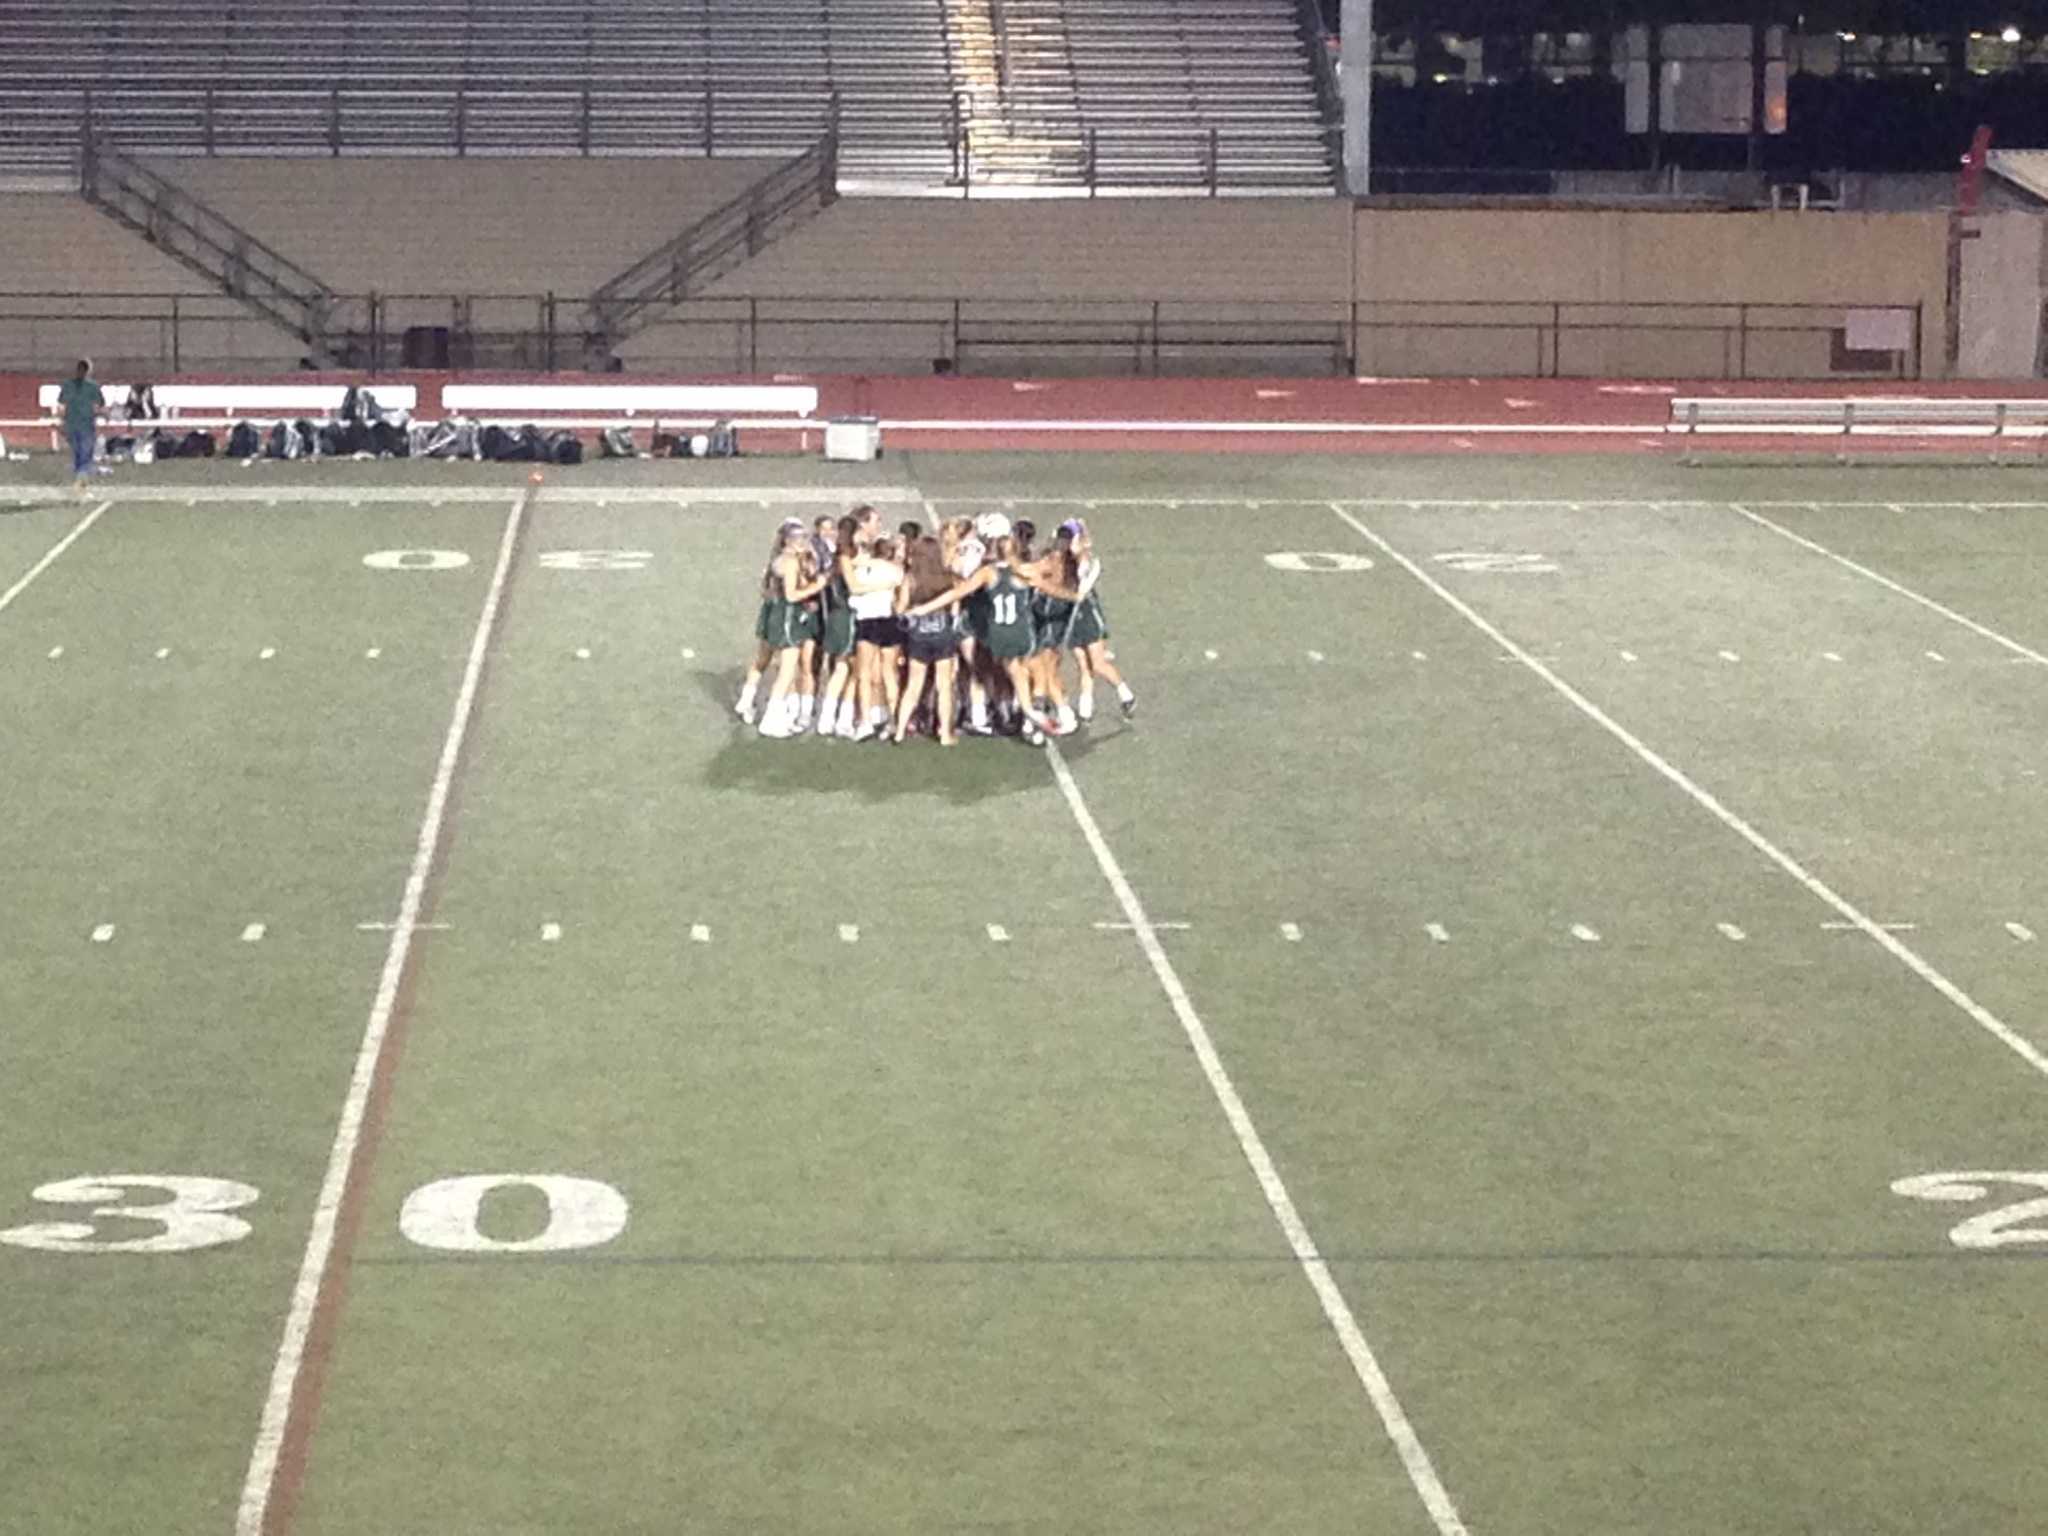 The Palo Alto girls' lacrosse team huddles after their win against St. Francis. Photo by Molly Fogarty.